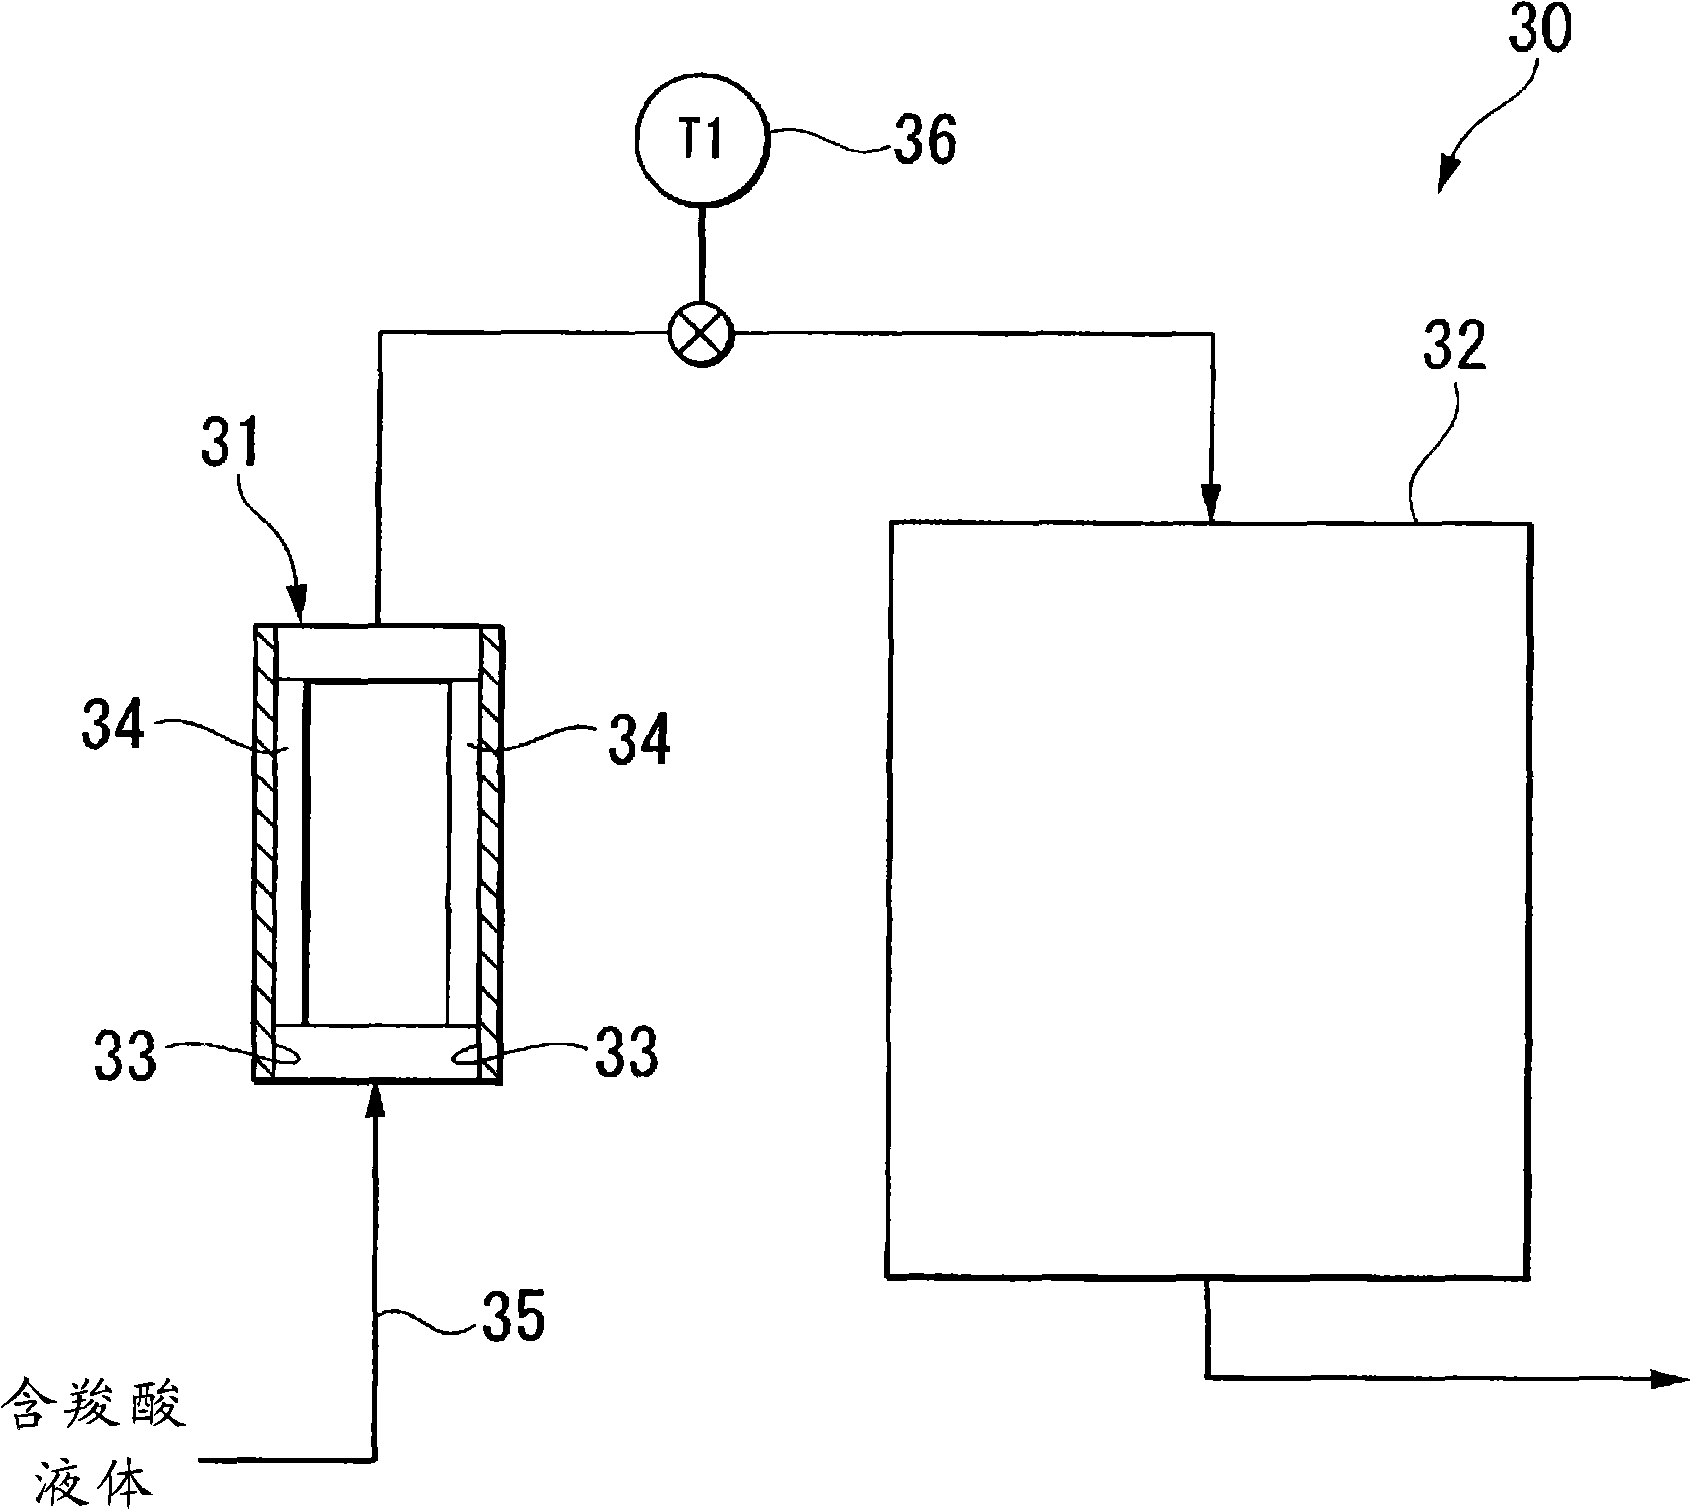 Process for producing carboxylic acid